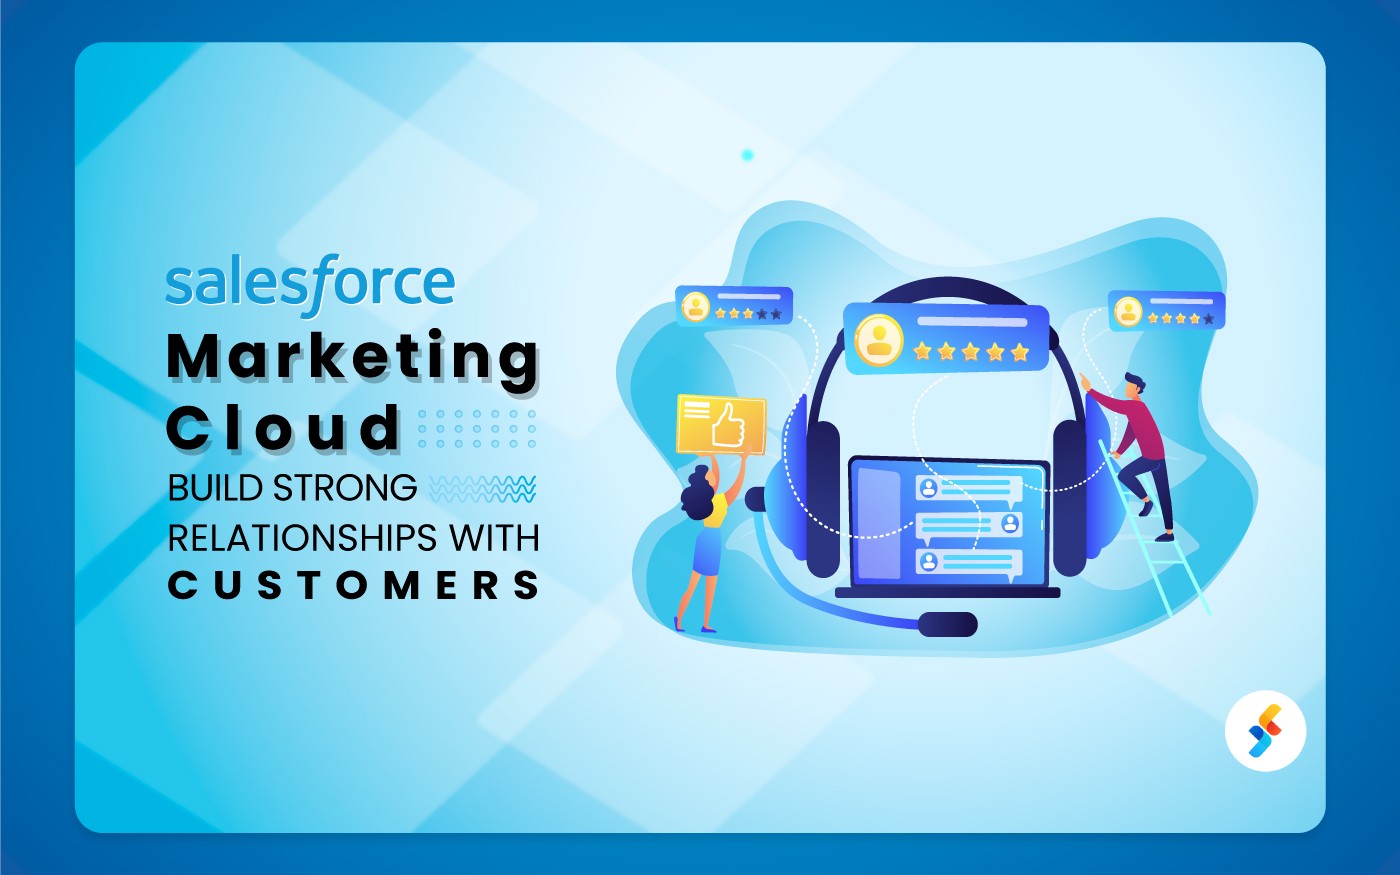 Salesforce Marketing Cloud: Build Strong Relationships with Customers (7 Ways)